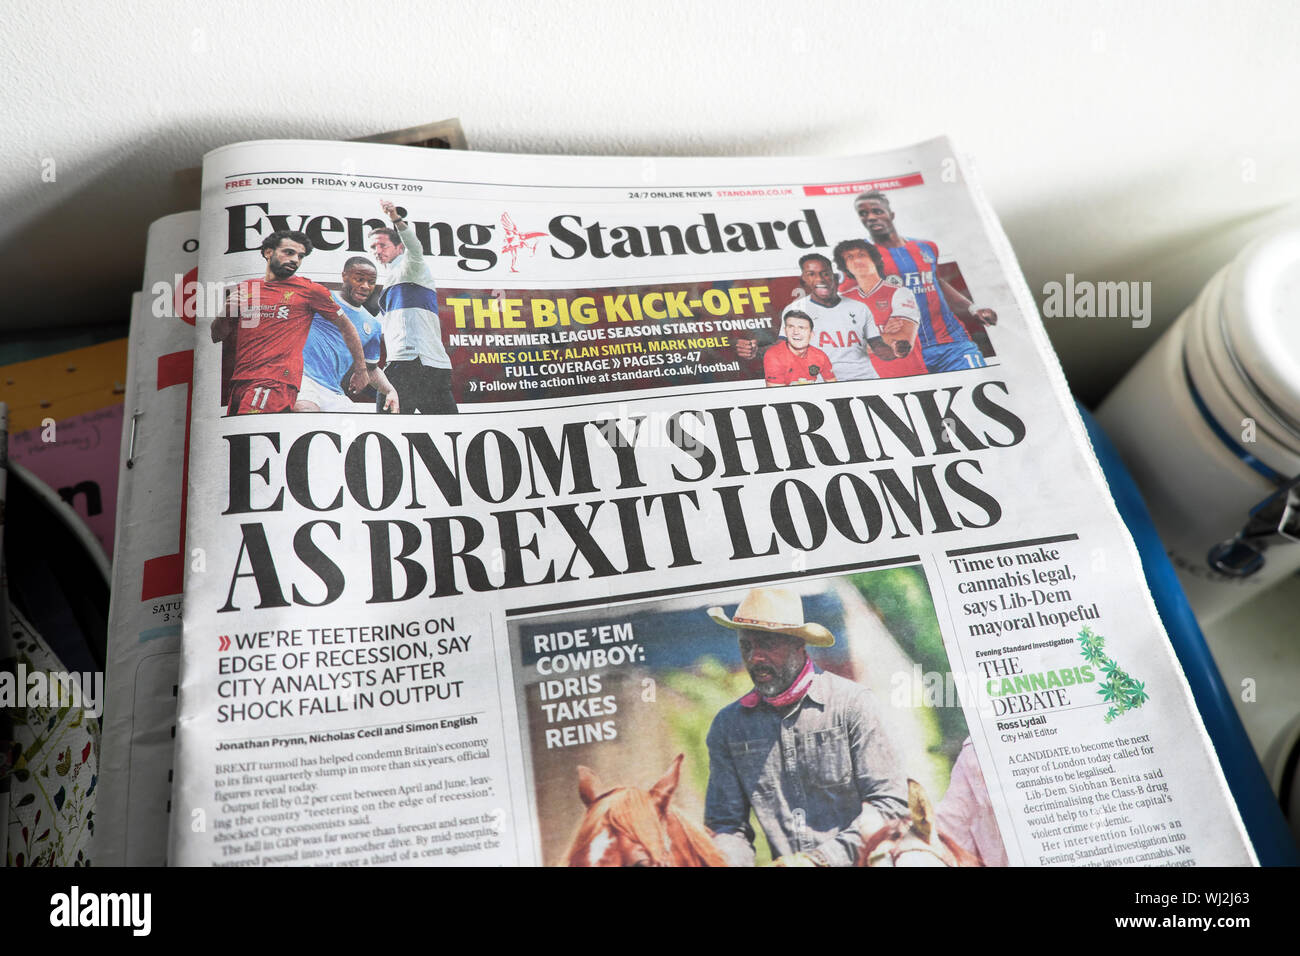 Evening Standard newspaper headline on front page 'Economy Shrinks as Brexit Looms'  9 August 2019  London UK Stock Photo